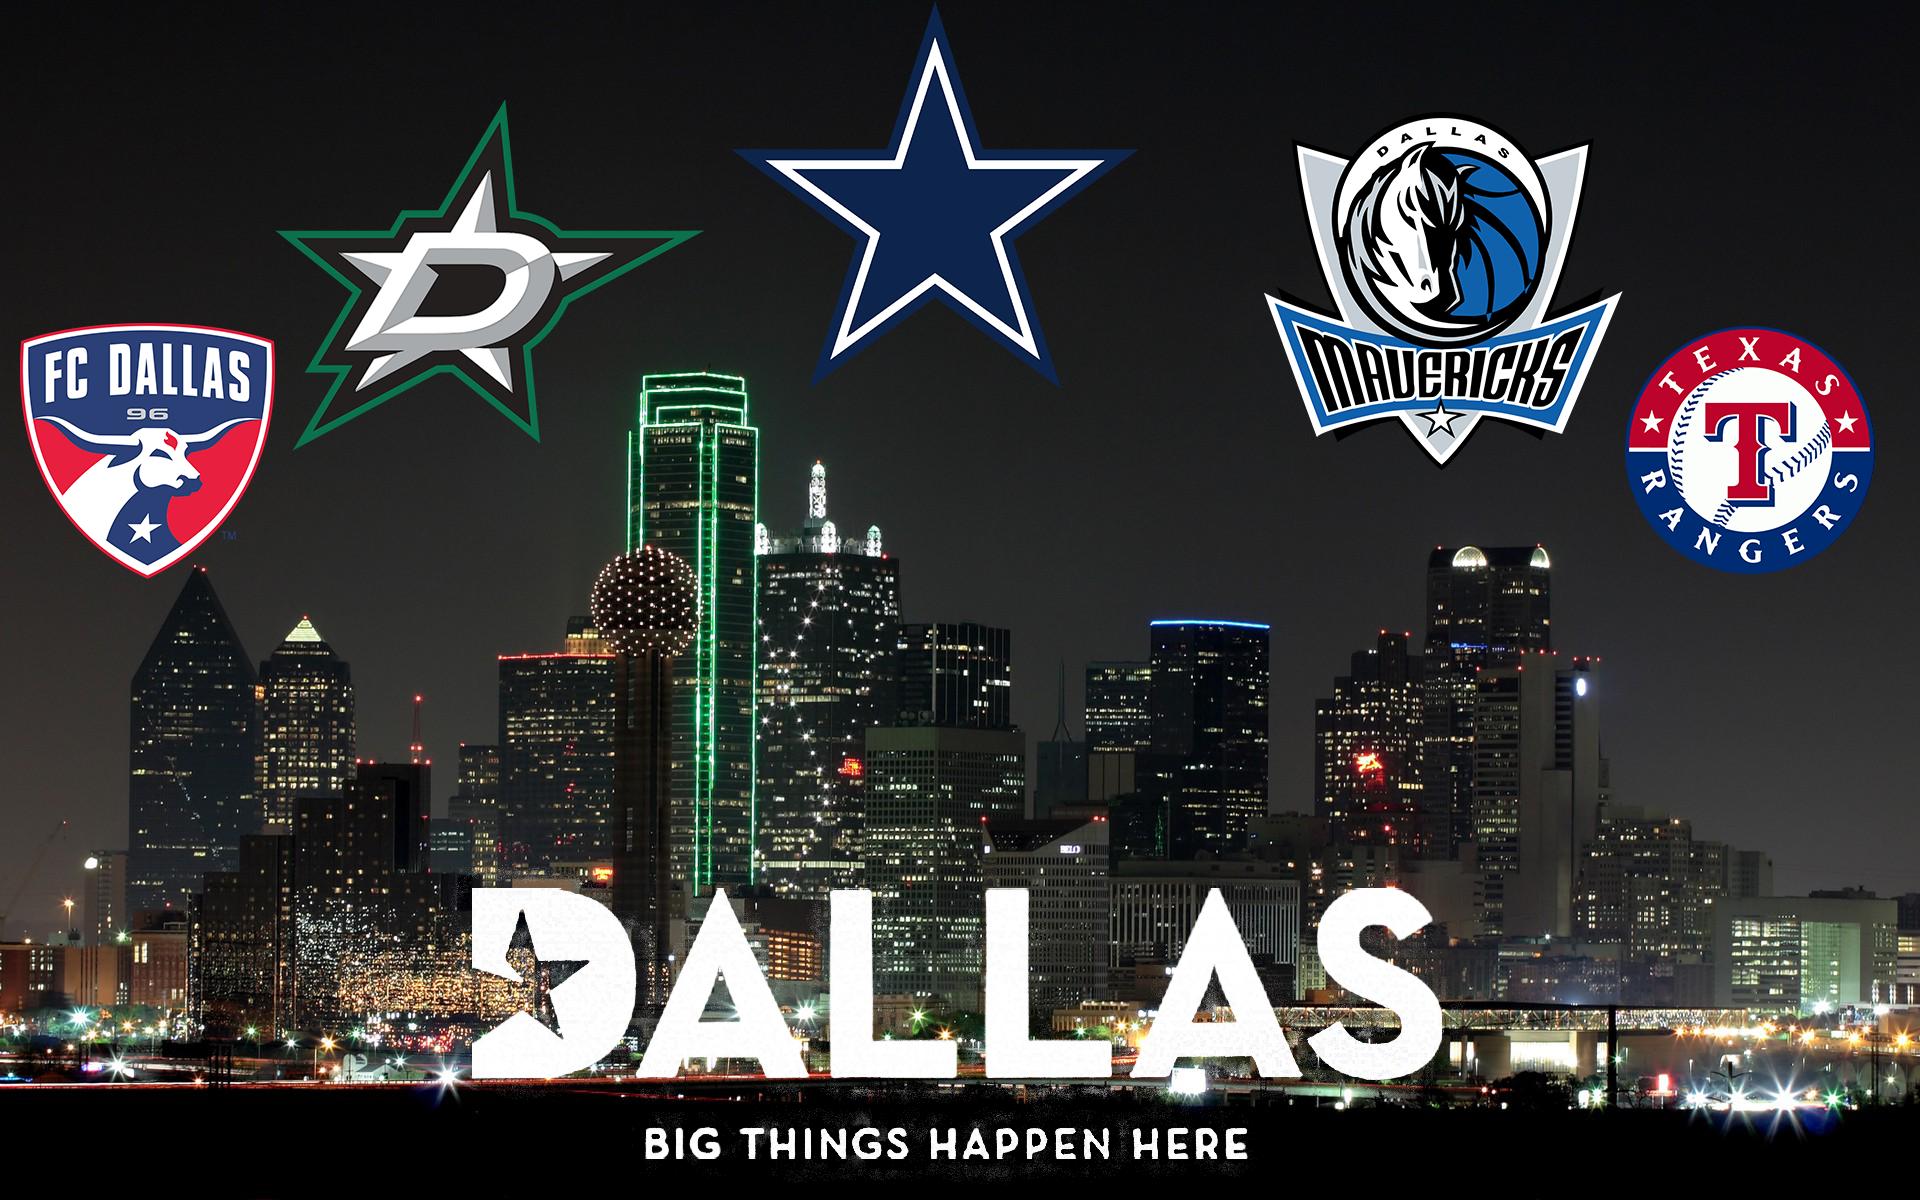 Free download Rangers Cowboys Stars Mavericks and other DFW sports